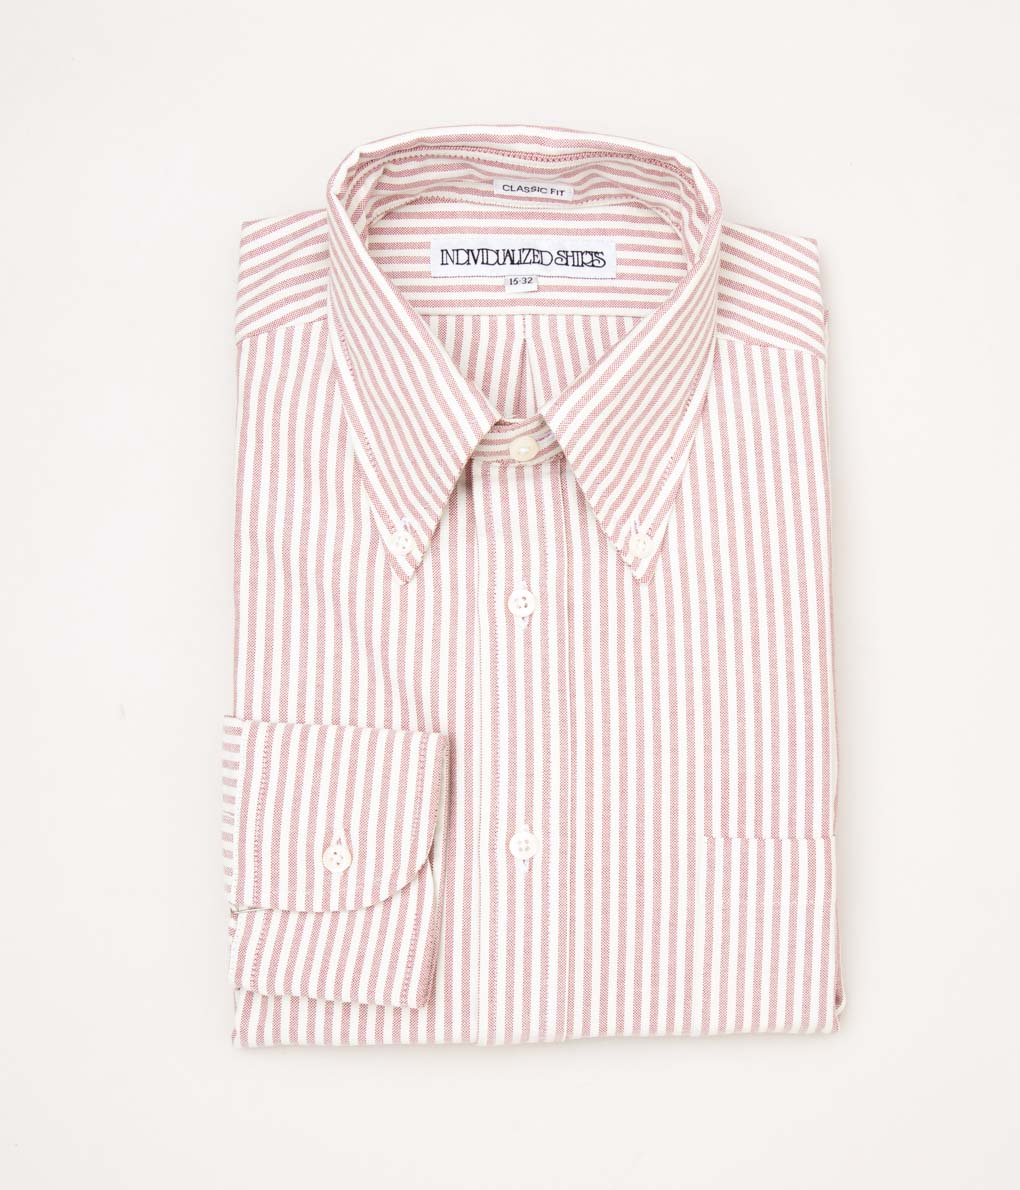 INDIVIDUALIZED SHIRTS "VINTAGE CANDY STRIPE (CLASSIC FIT BUTTON DOWN SHIRT)(IVORY/RED)"